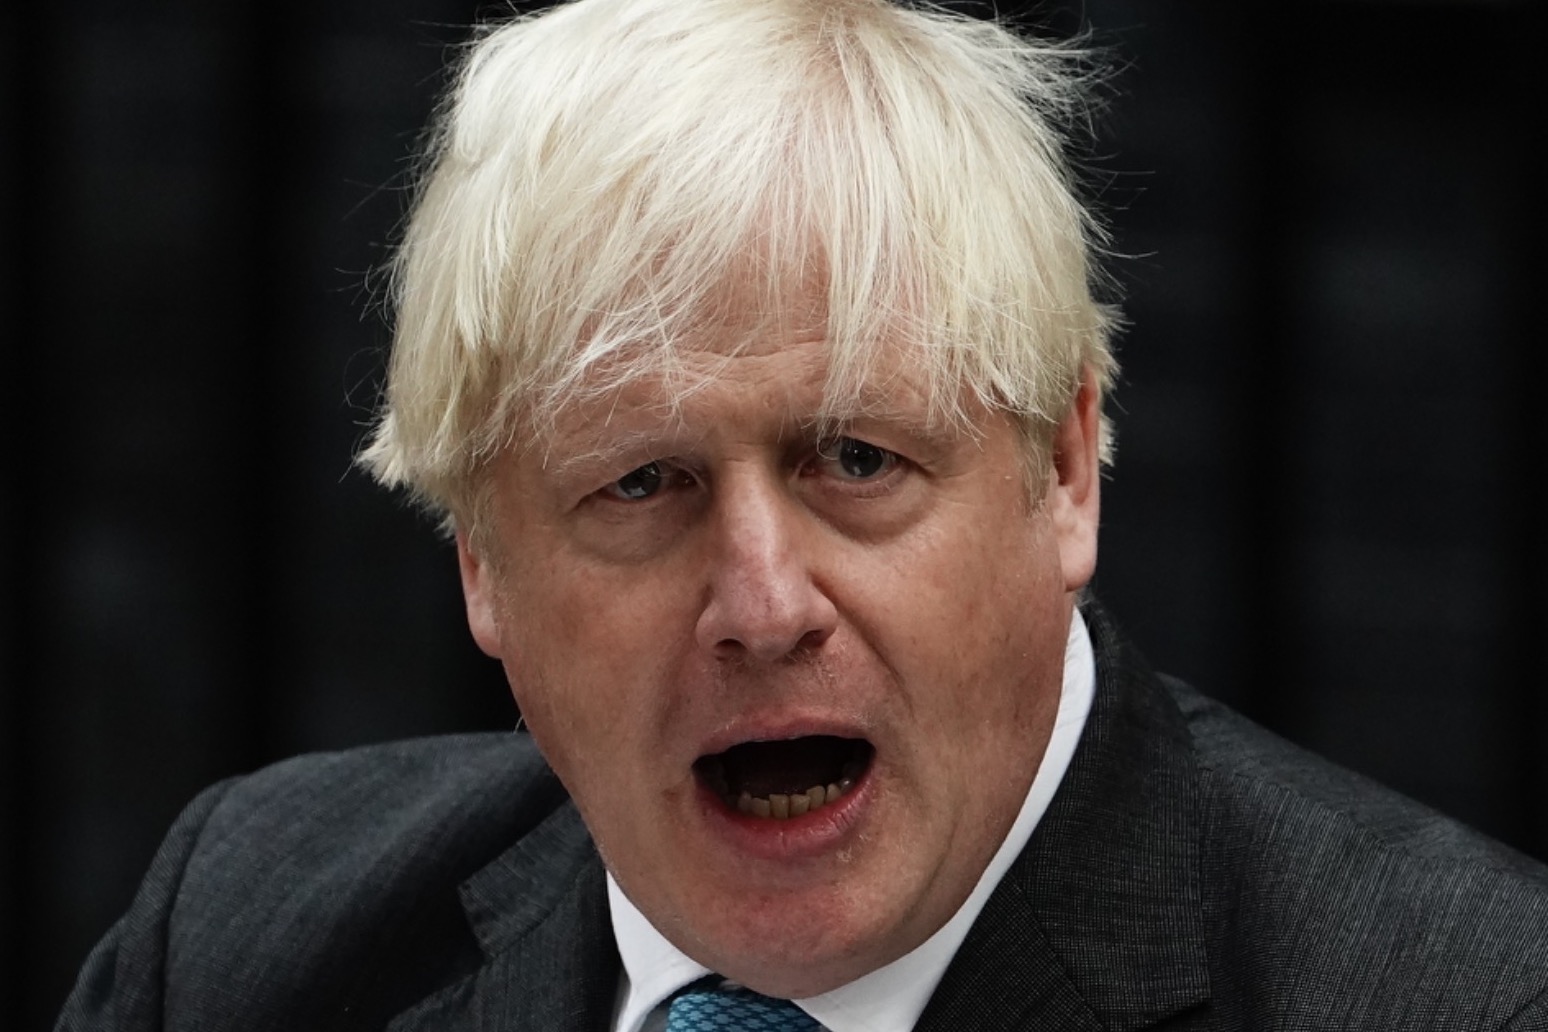 Boris Johnson pulls out of race for 10 Downing Street 